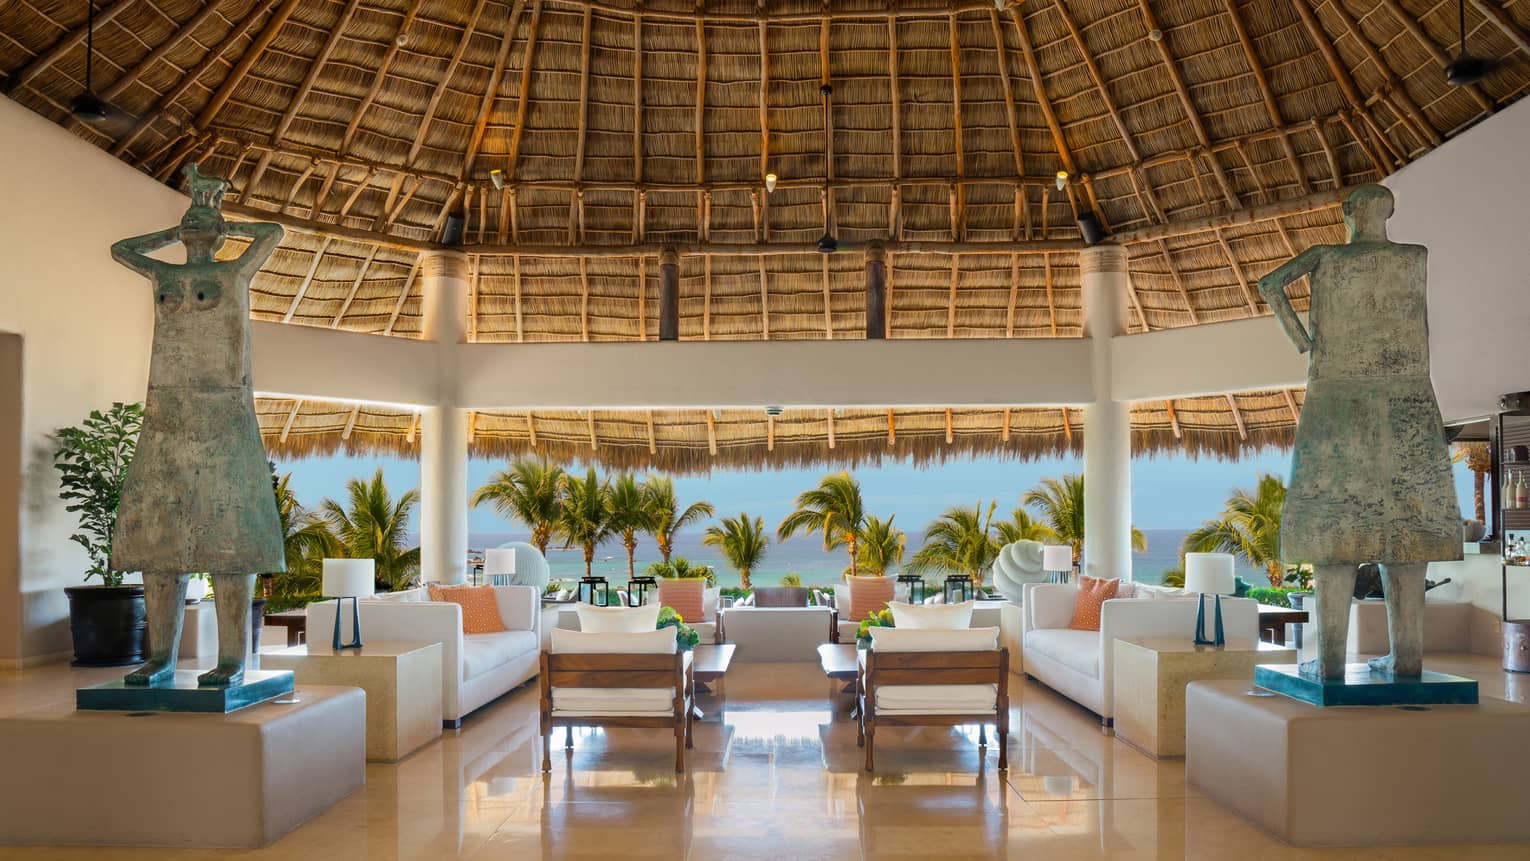 Indoor-outdoor lobby area with two sofas and two arm chairs under thatched-roof ceiling